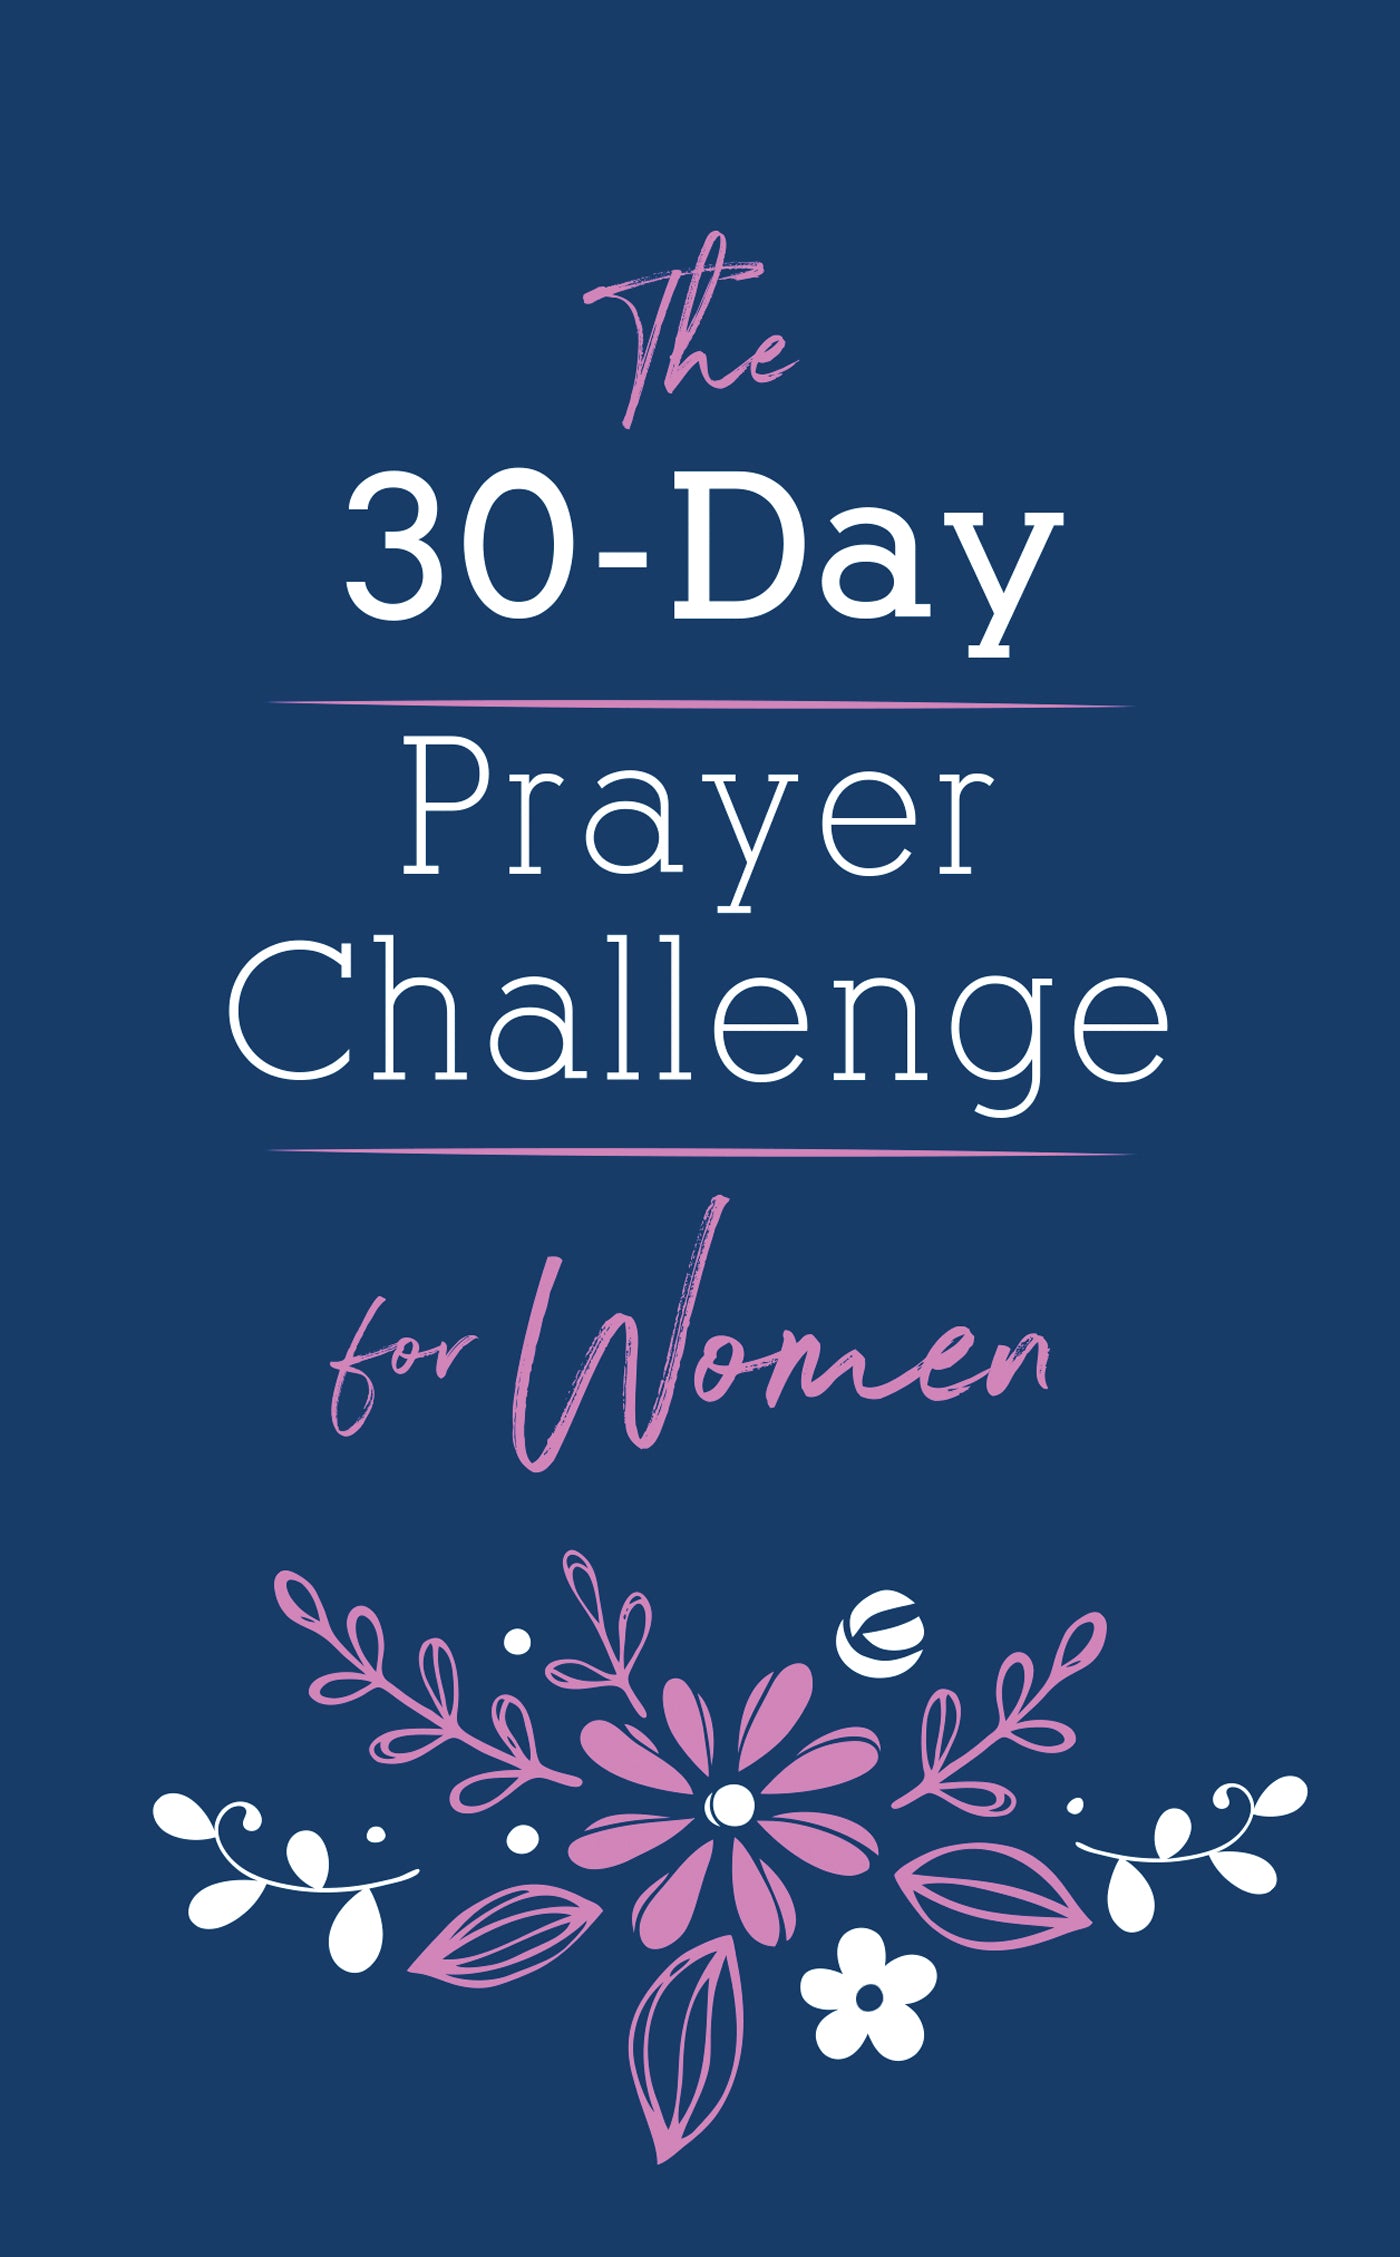 The 30-Day Prayer Challenge for Women - The Christian Gift Company